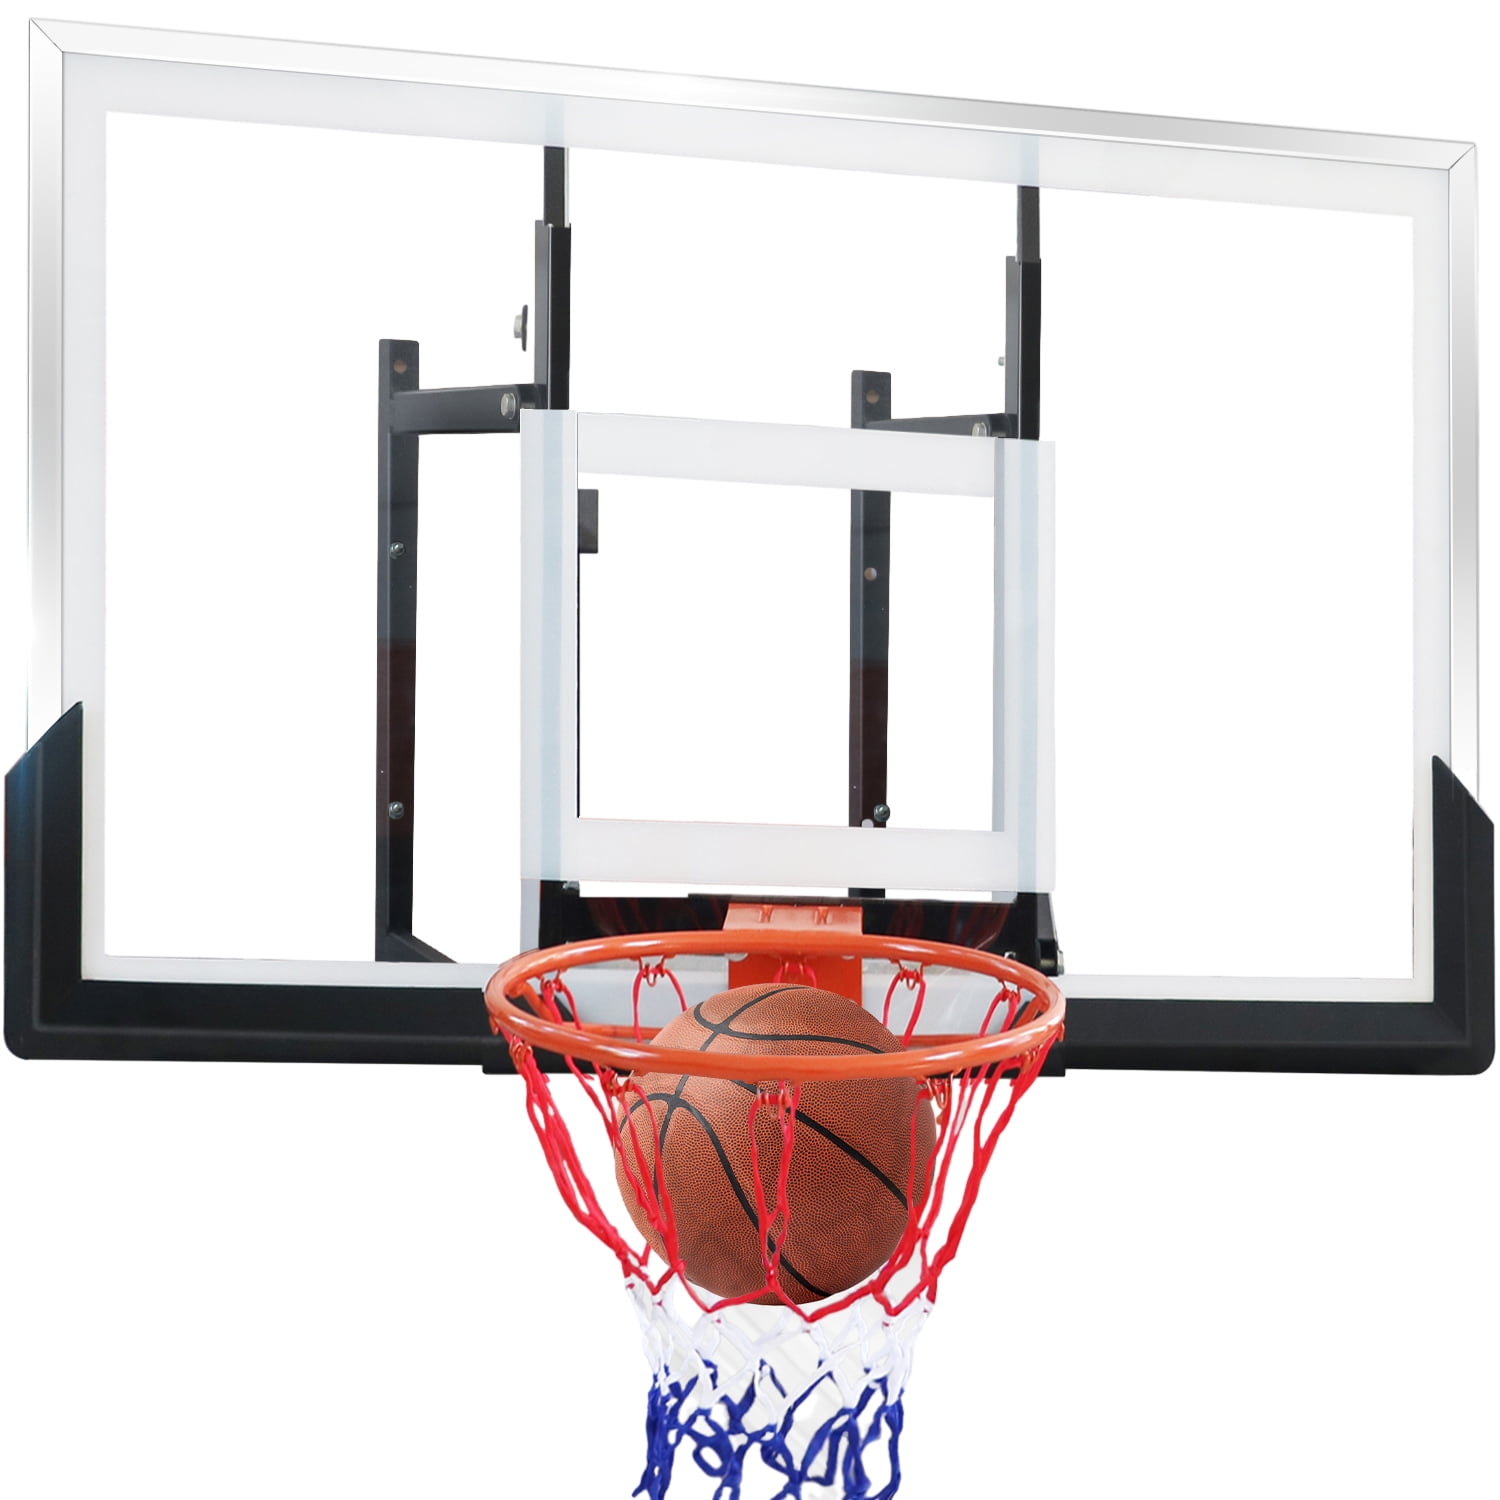 Summer Waves Basketball Set Basketball and Unisex Pools, for with Backboard included, Basketball Frame Adults, Hoop White, Rim, Inflatable for